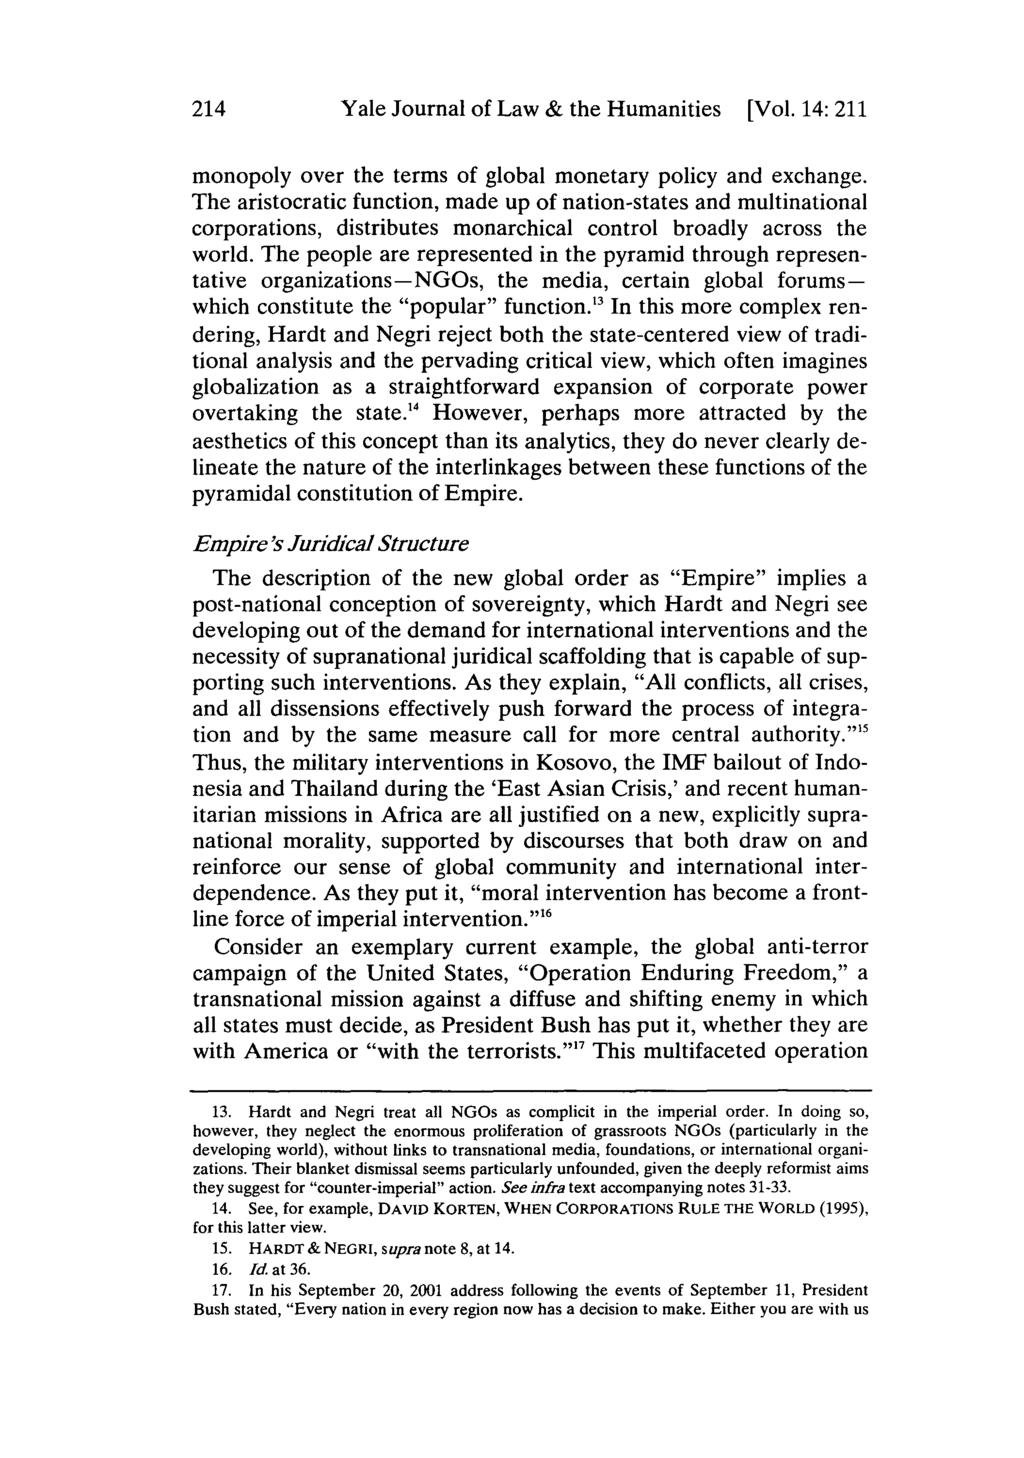 Yale Journal of Law & the Humanities, Vol. 14 [2002], Iss. 1, Art. 5 Yale Journal of Law & the Humanities [Vol. 14: 211 monopoly over the terms of global monetary policy and exchange.